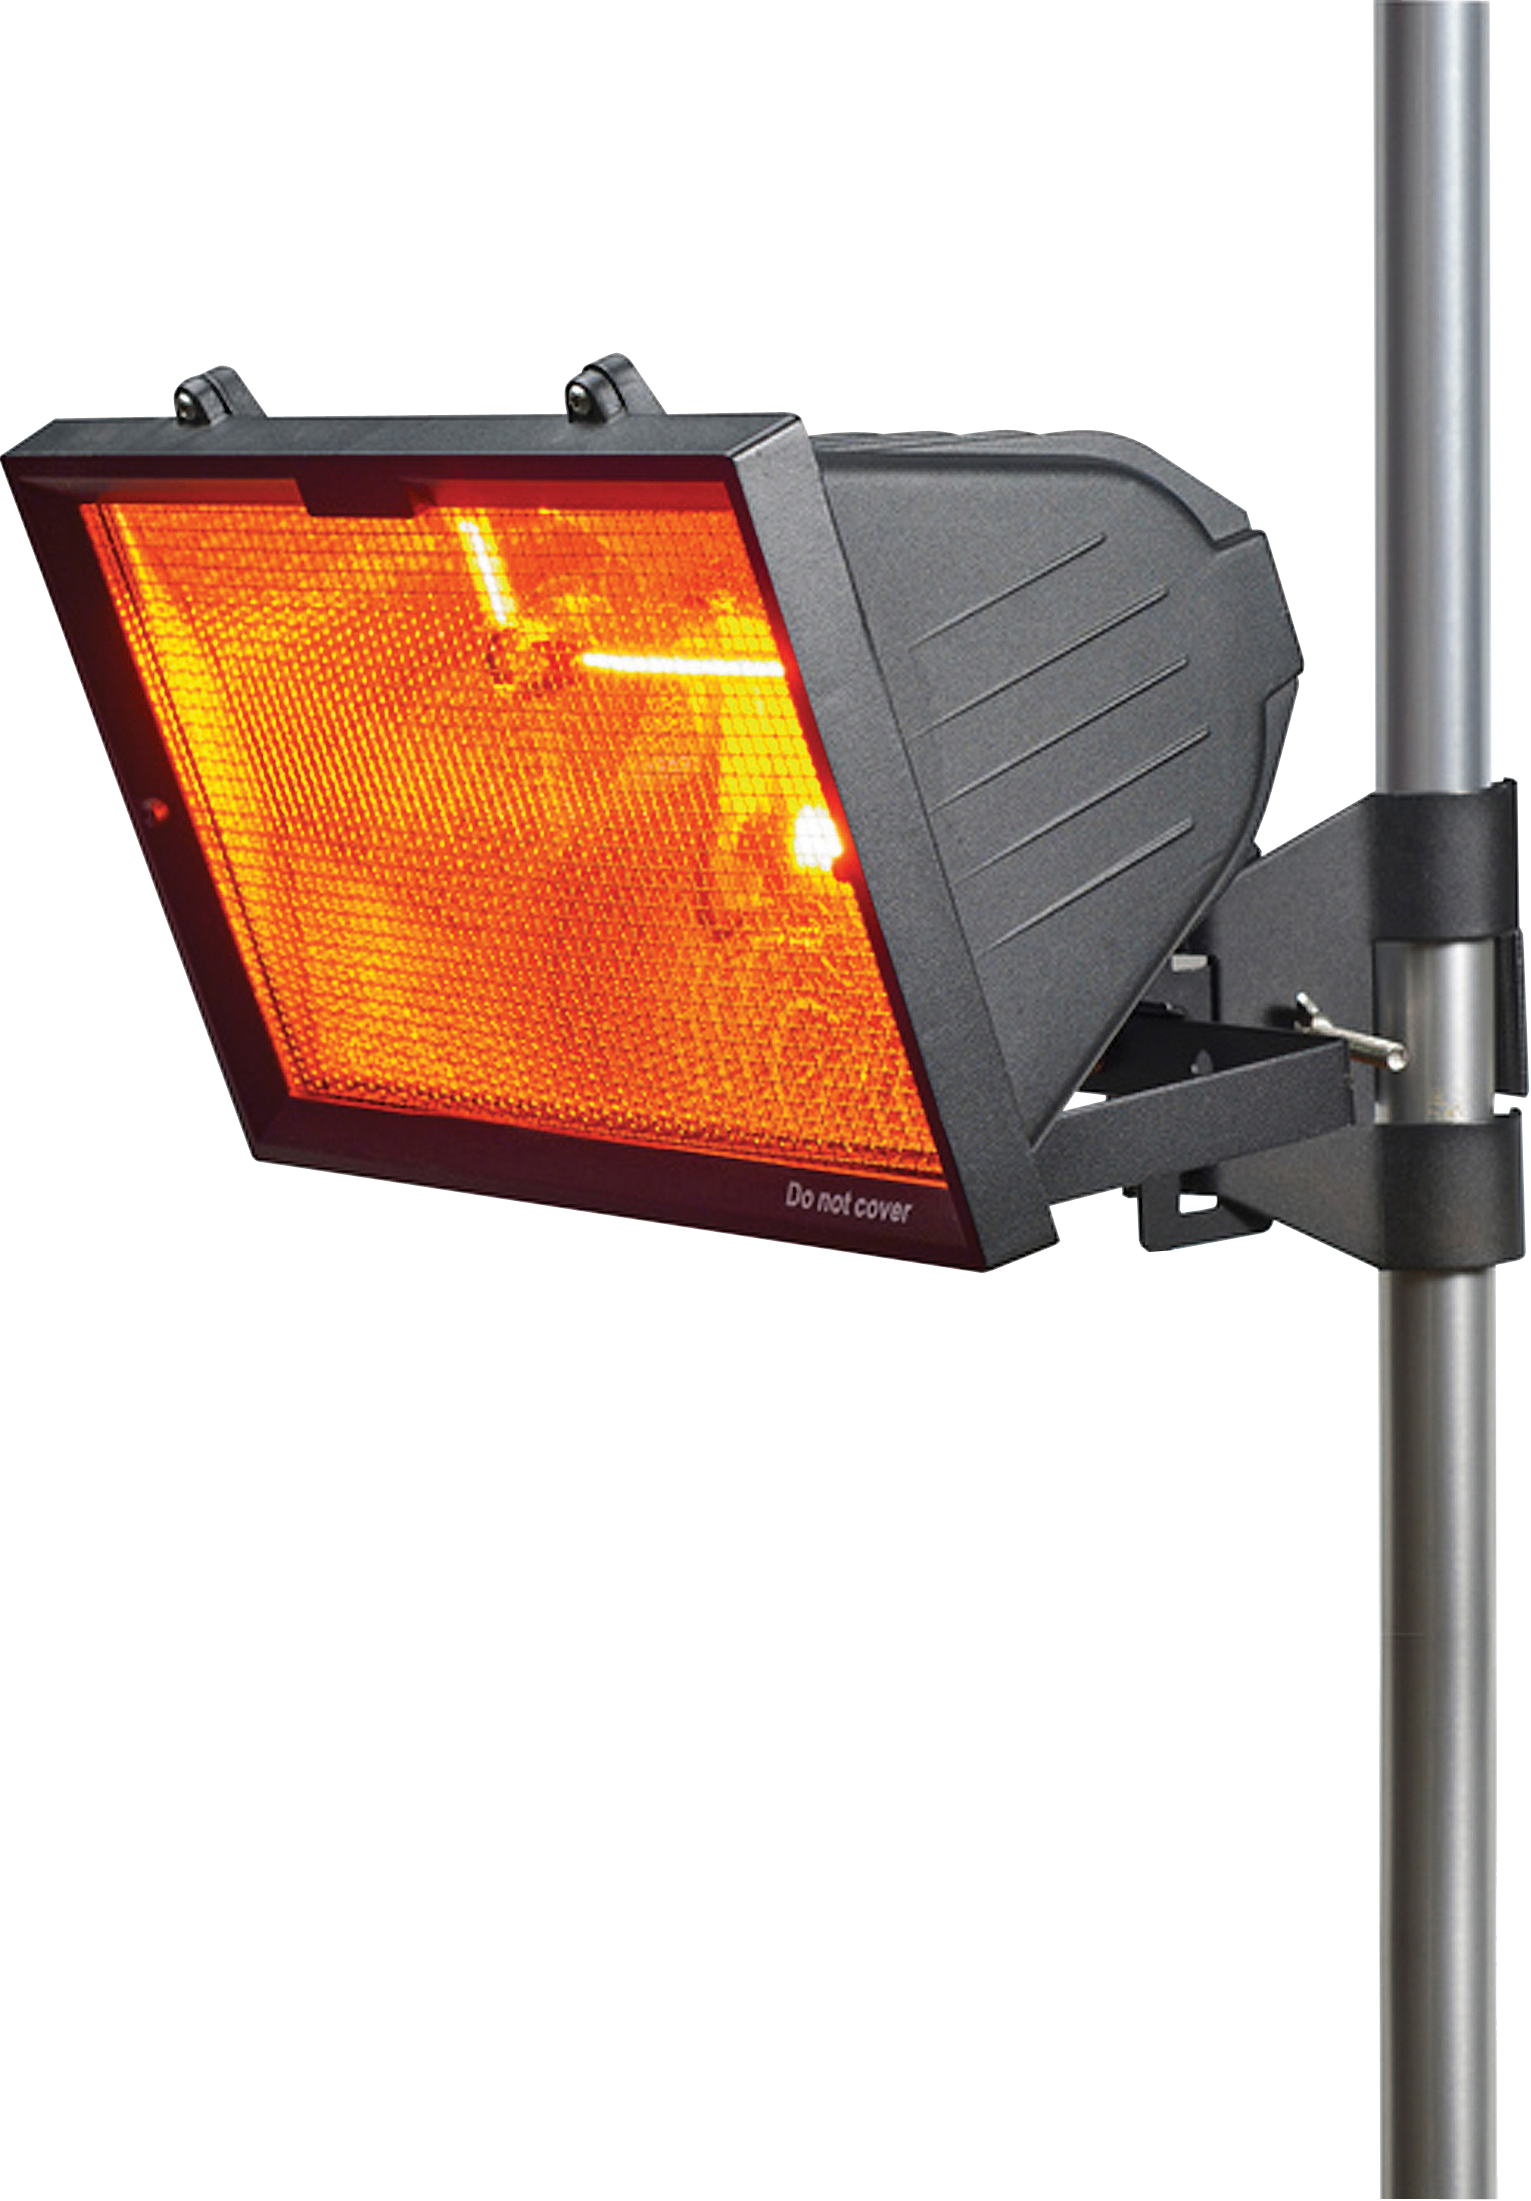 ML Accessories-HEOD1309BK IP24 1300W Outdoor Infrared Heater with Mesh Grille and RS7 1300W Tube Black